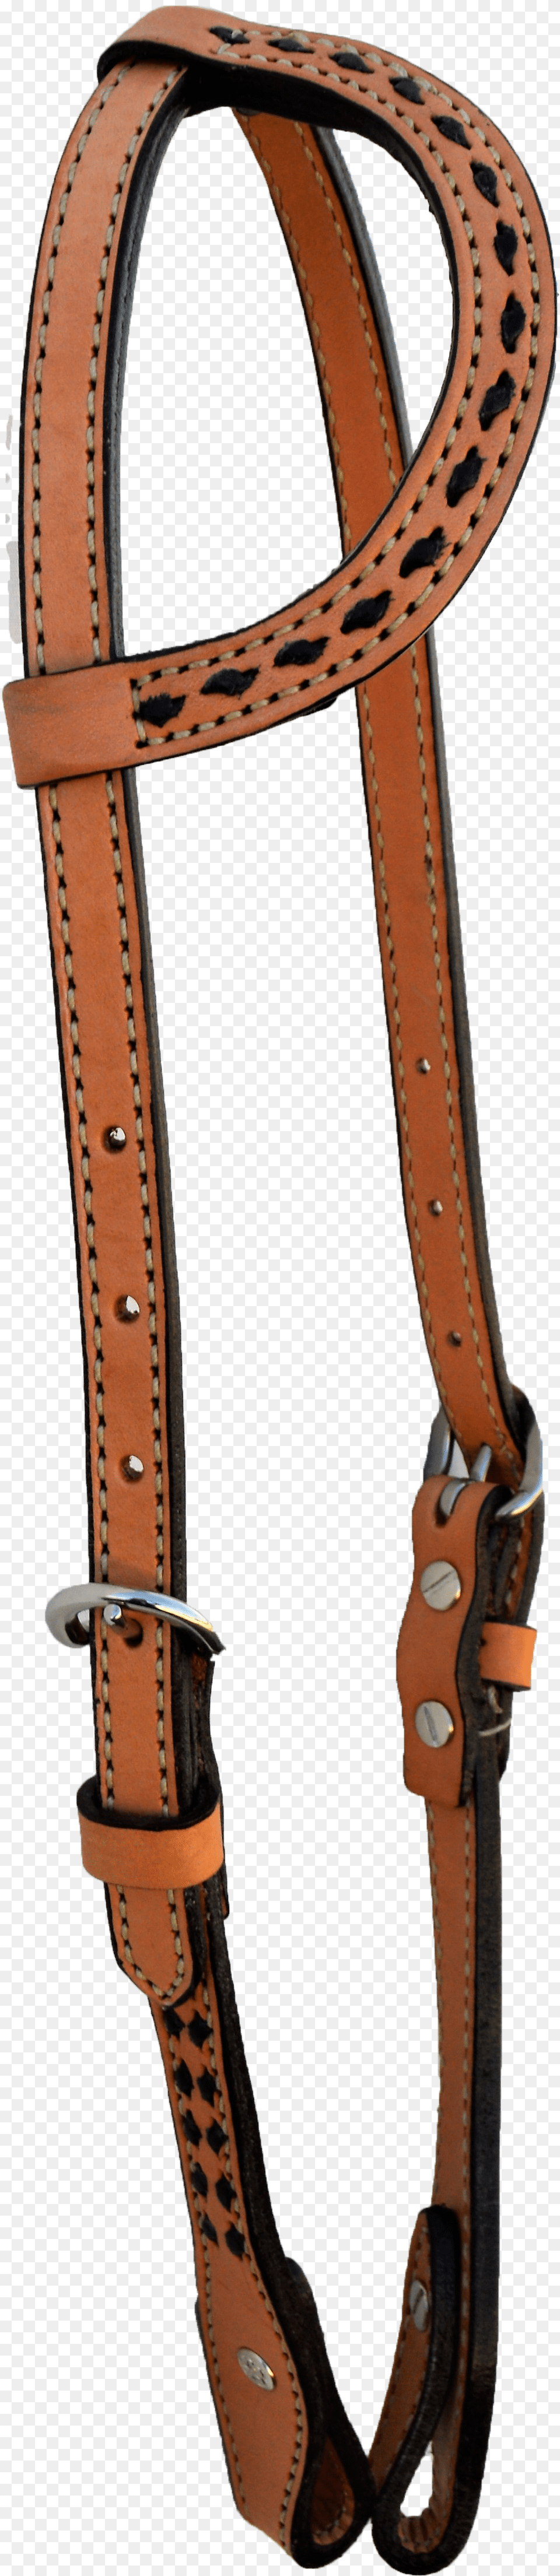 Abs One Ear Flat Style Headstall Strap, Accessories, Belt Free Transparent Png